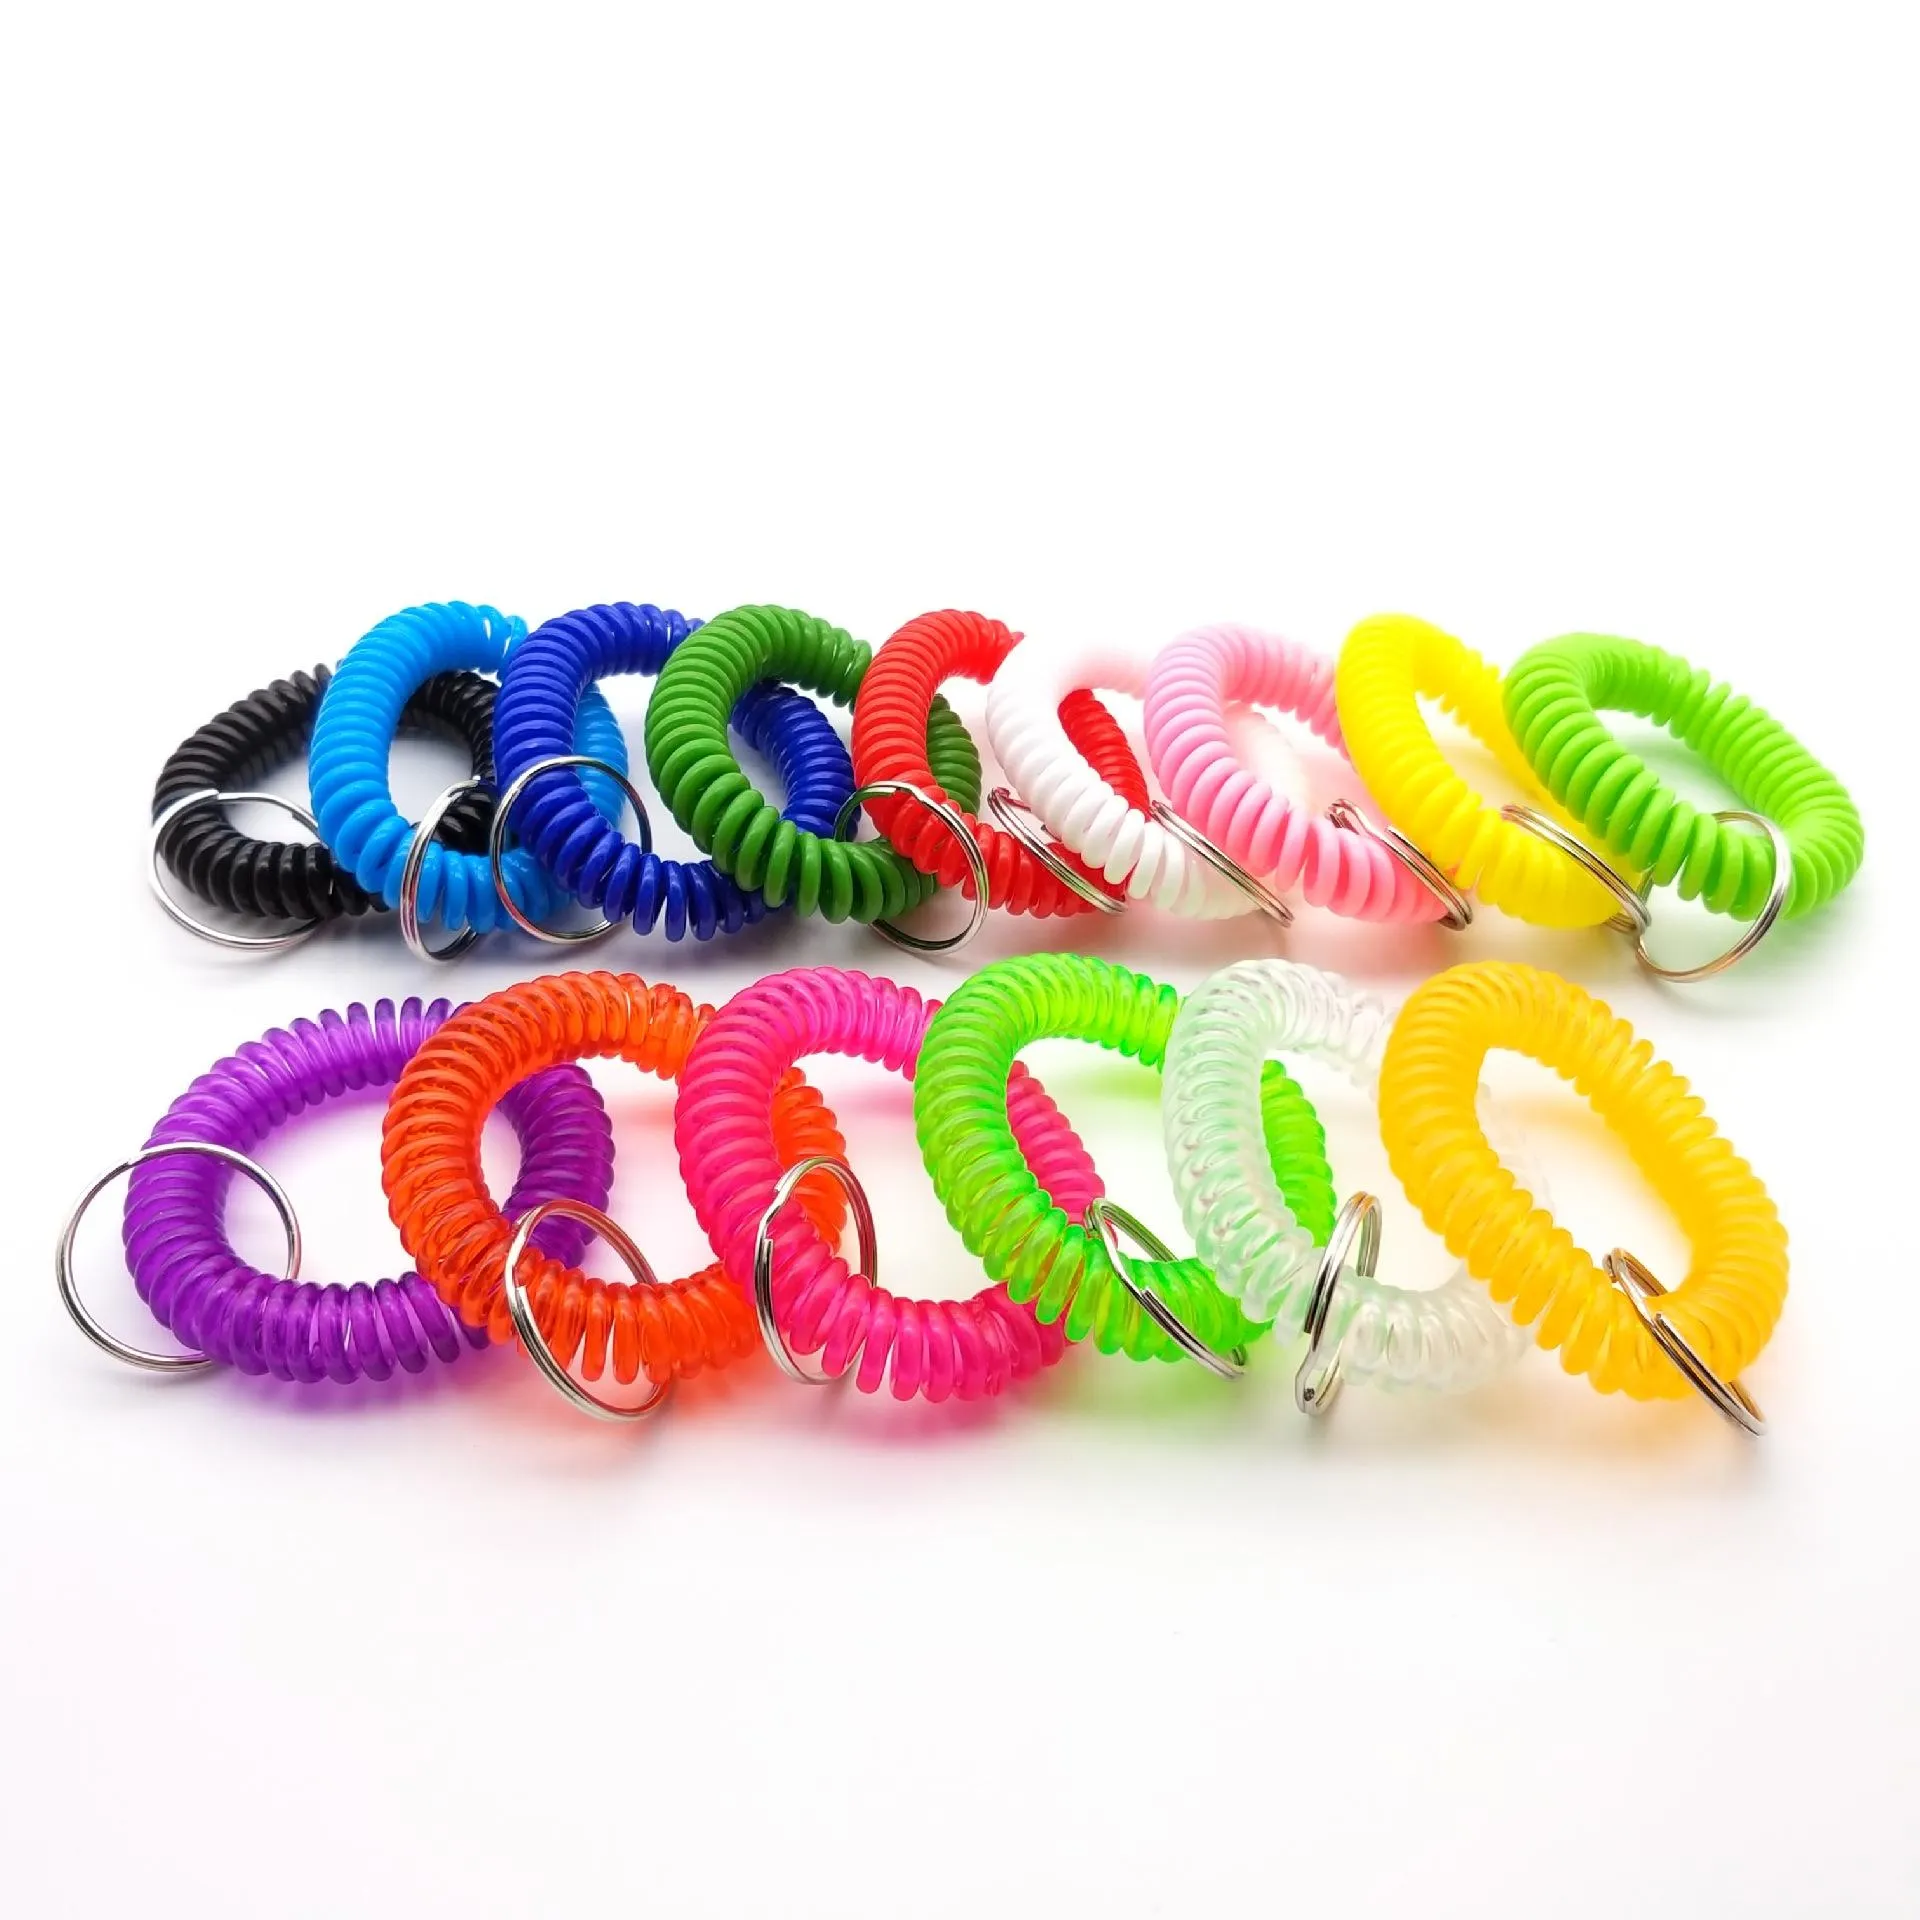 Amazon.com: Round Iridescent Stretchy Spring Spiral Wrist Coil Key Chain  Ring Holder Wristband Bracelet Keychain Pack of 5 (Blue), 5.5*5.5*1.0cm :  Office Products